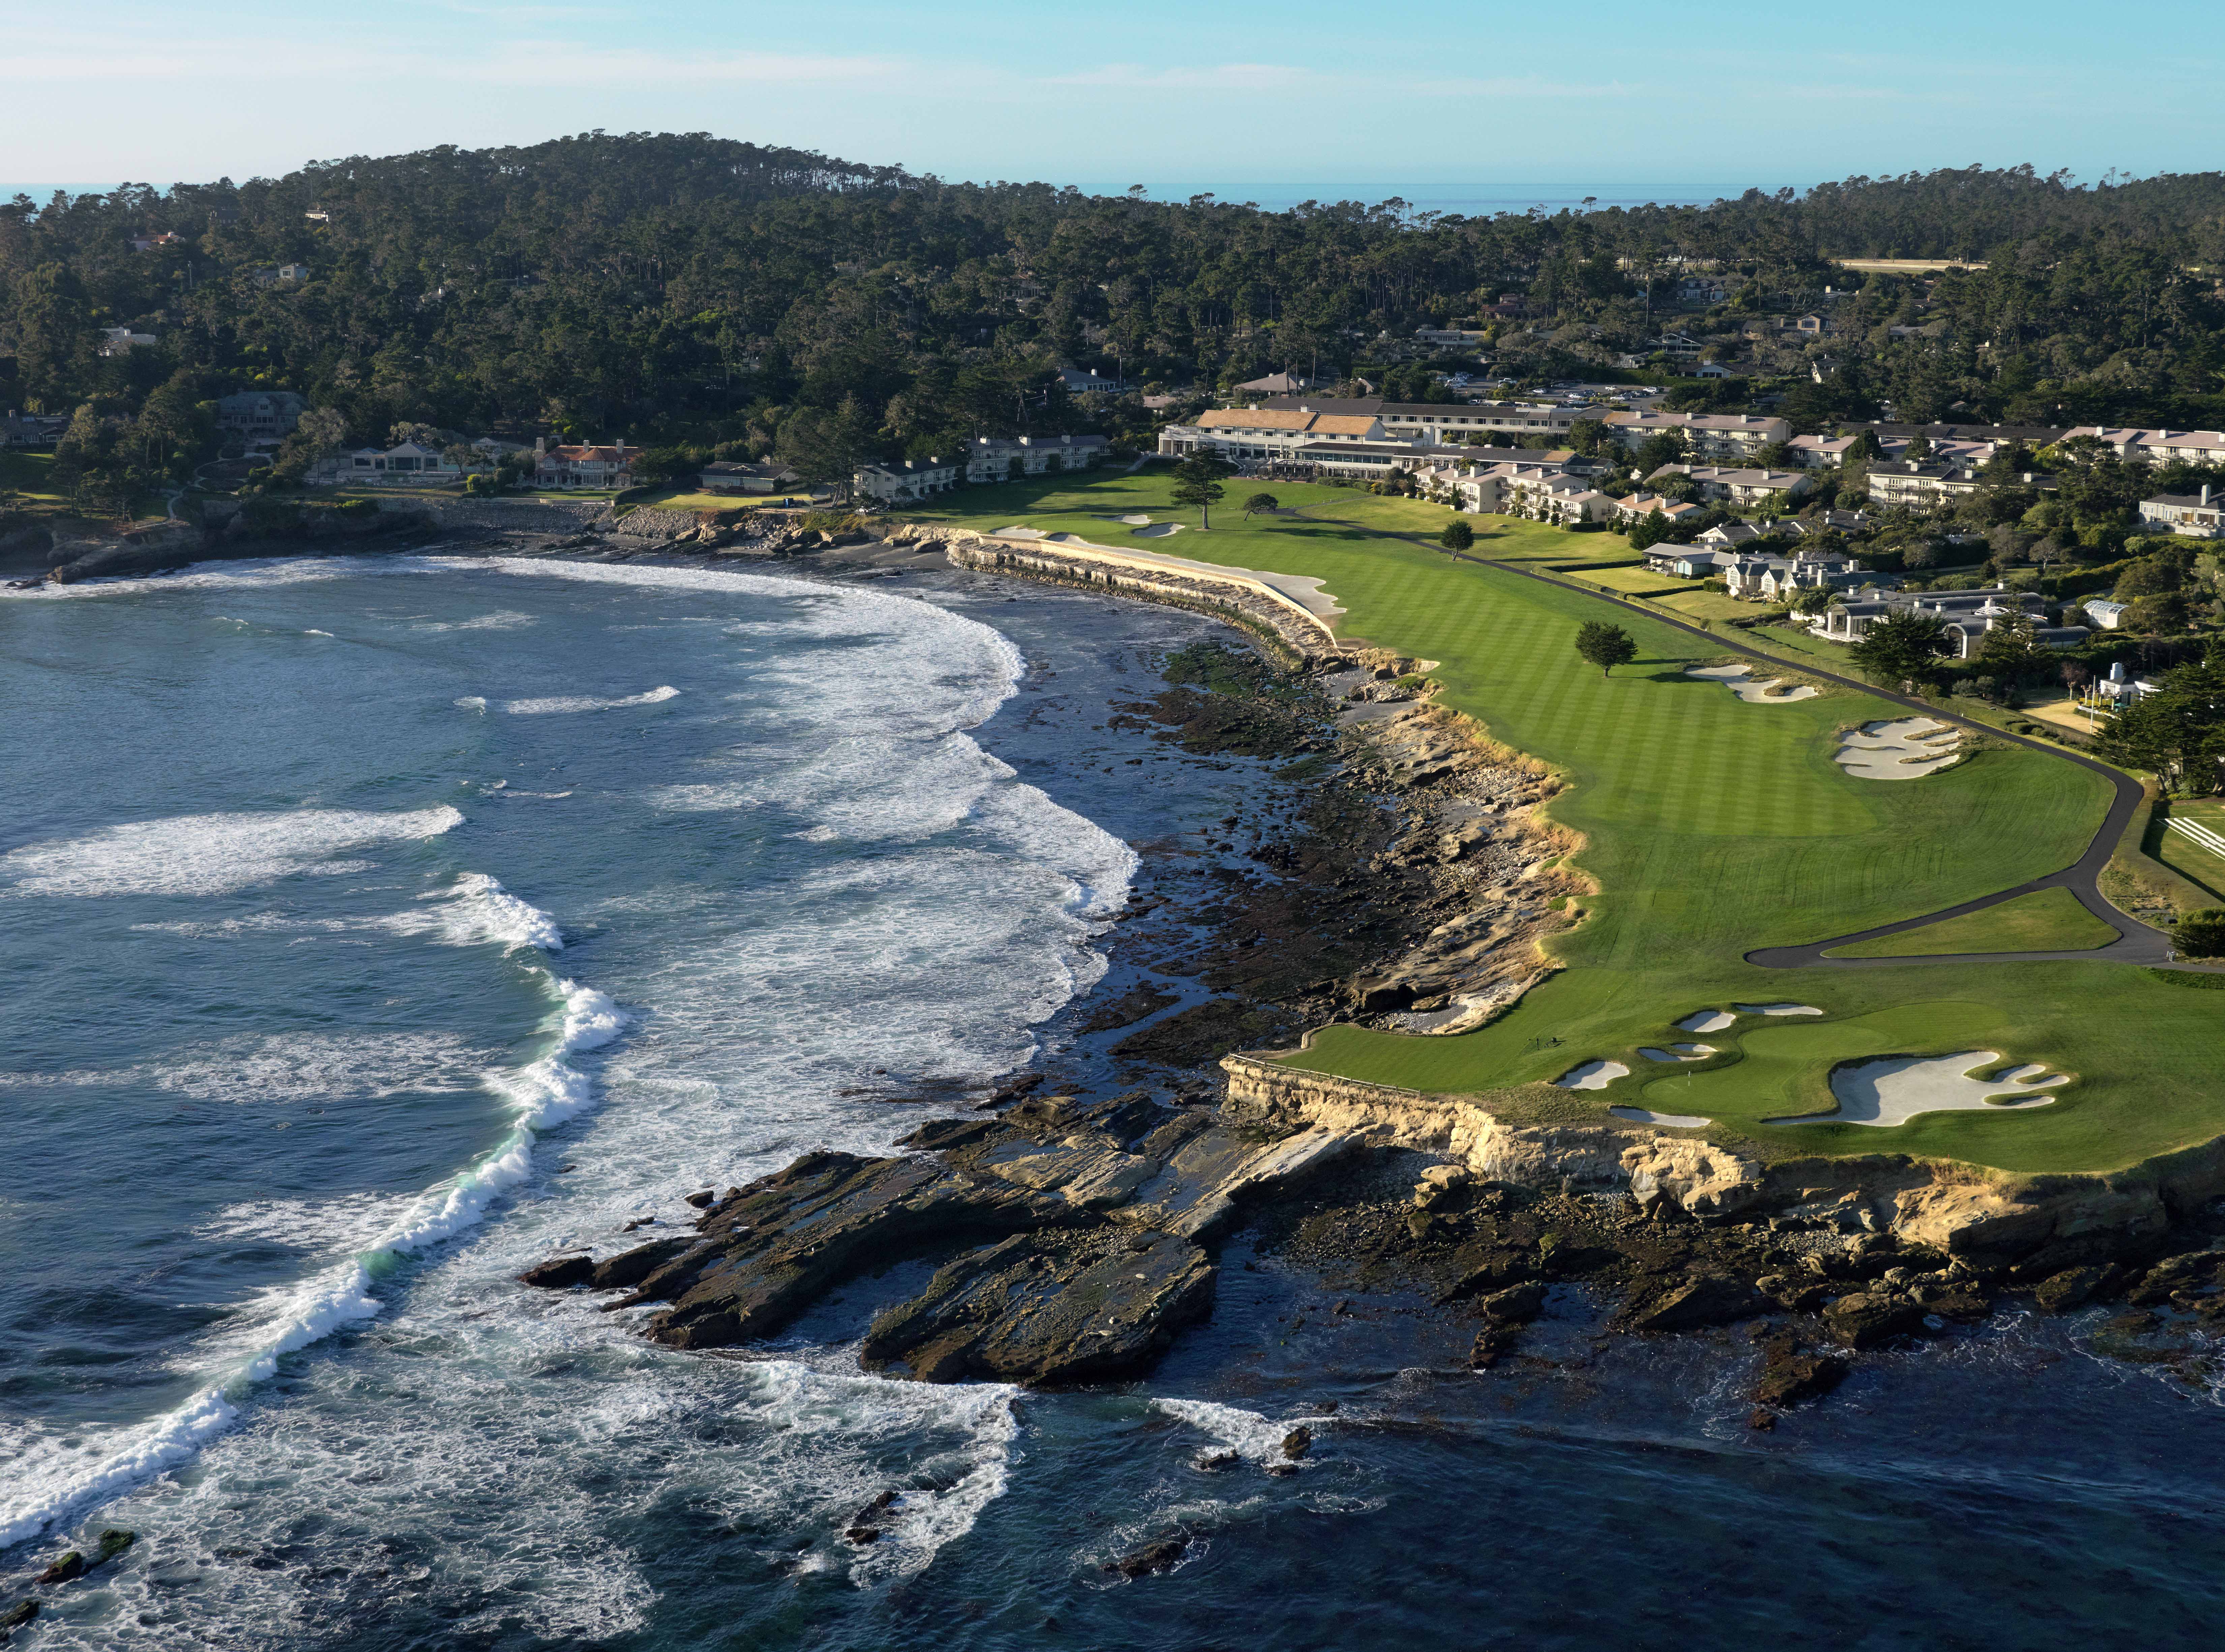 Play 7 of the World's Greatest Golf Holes at Pebble Beach Resorts